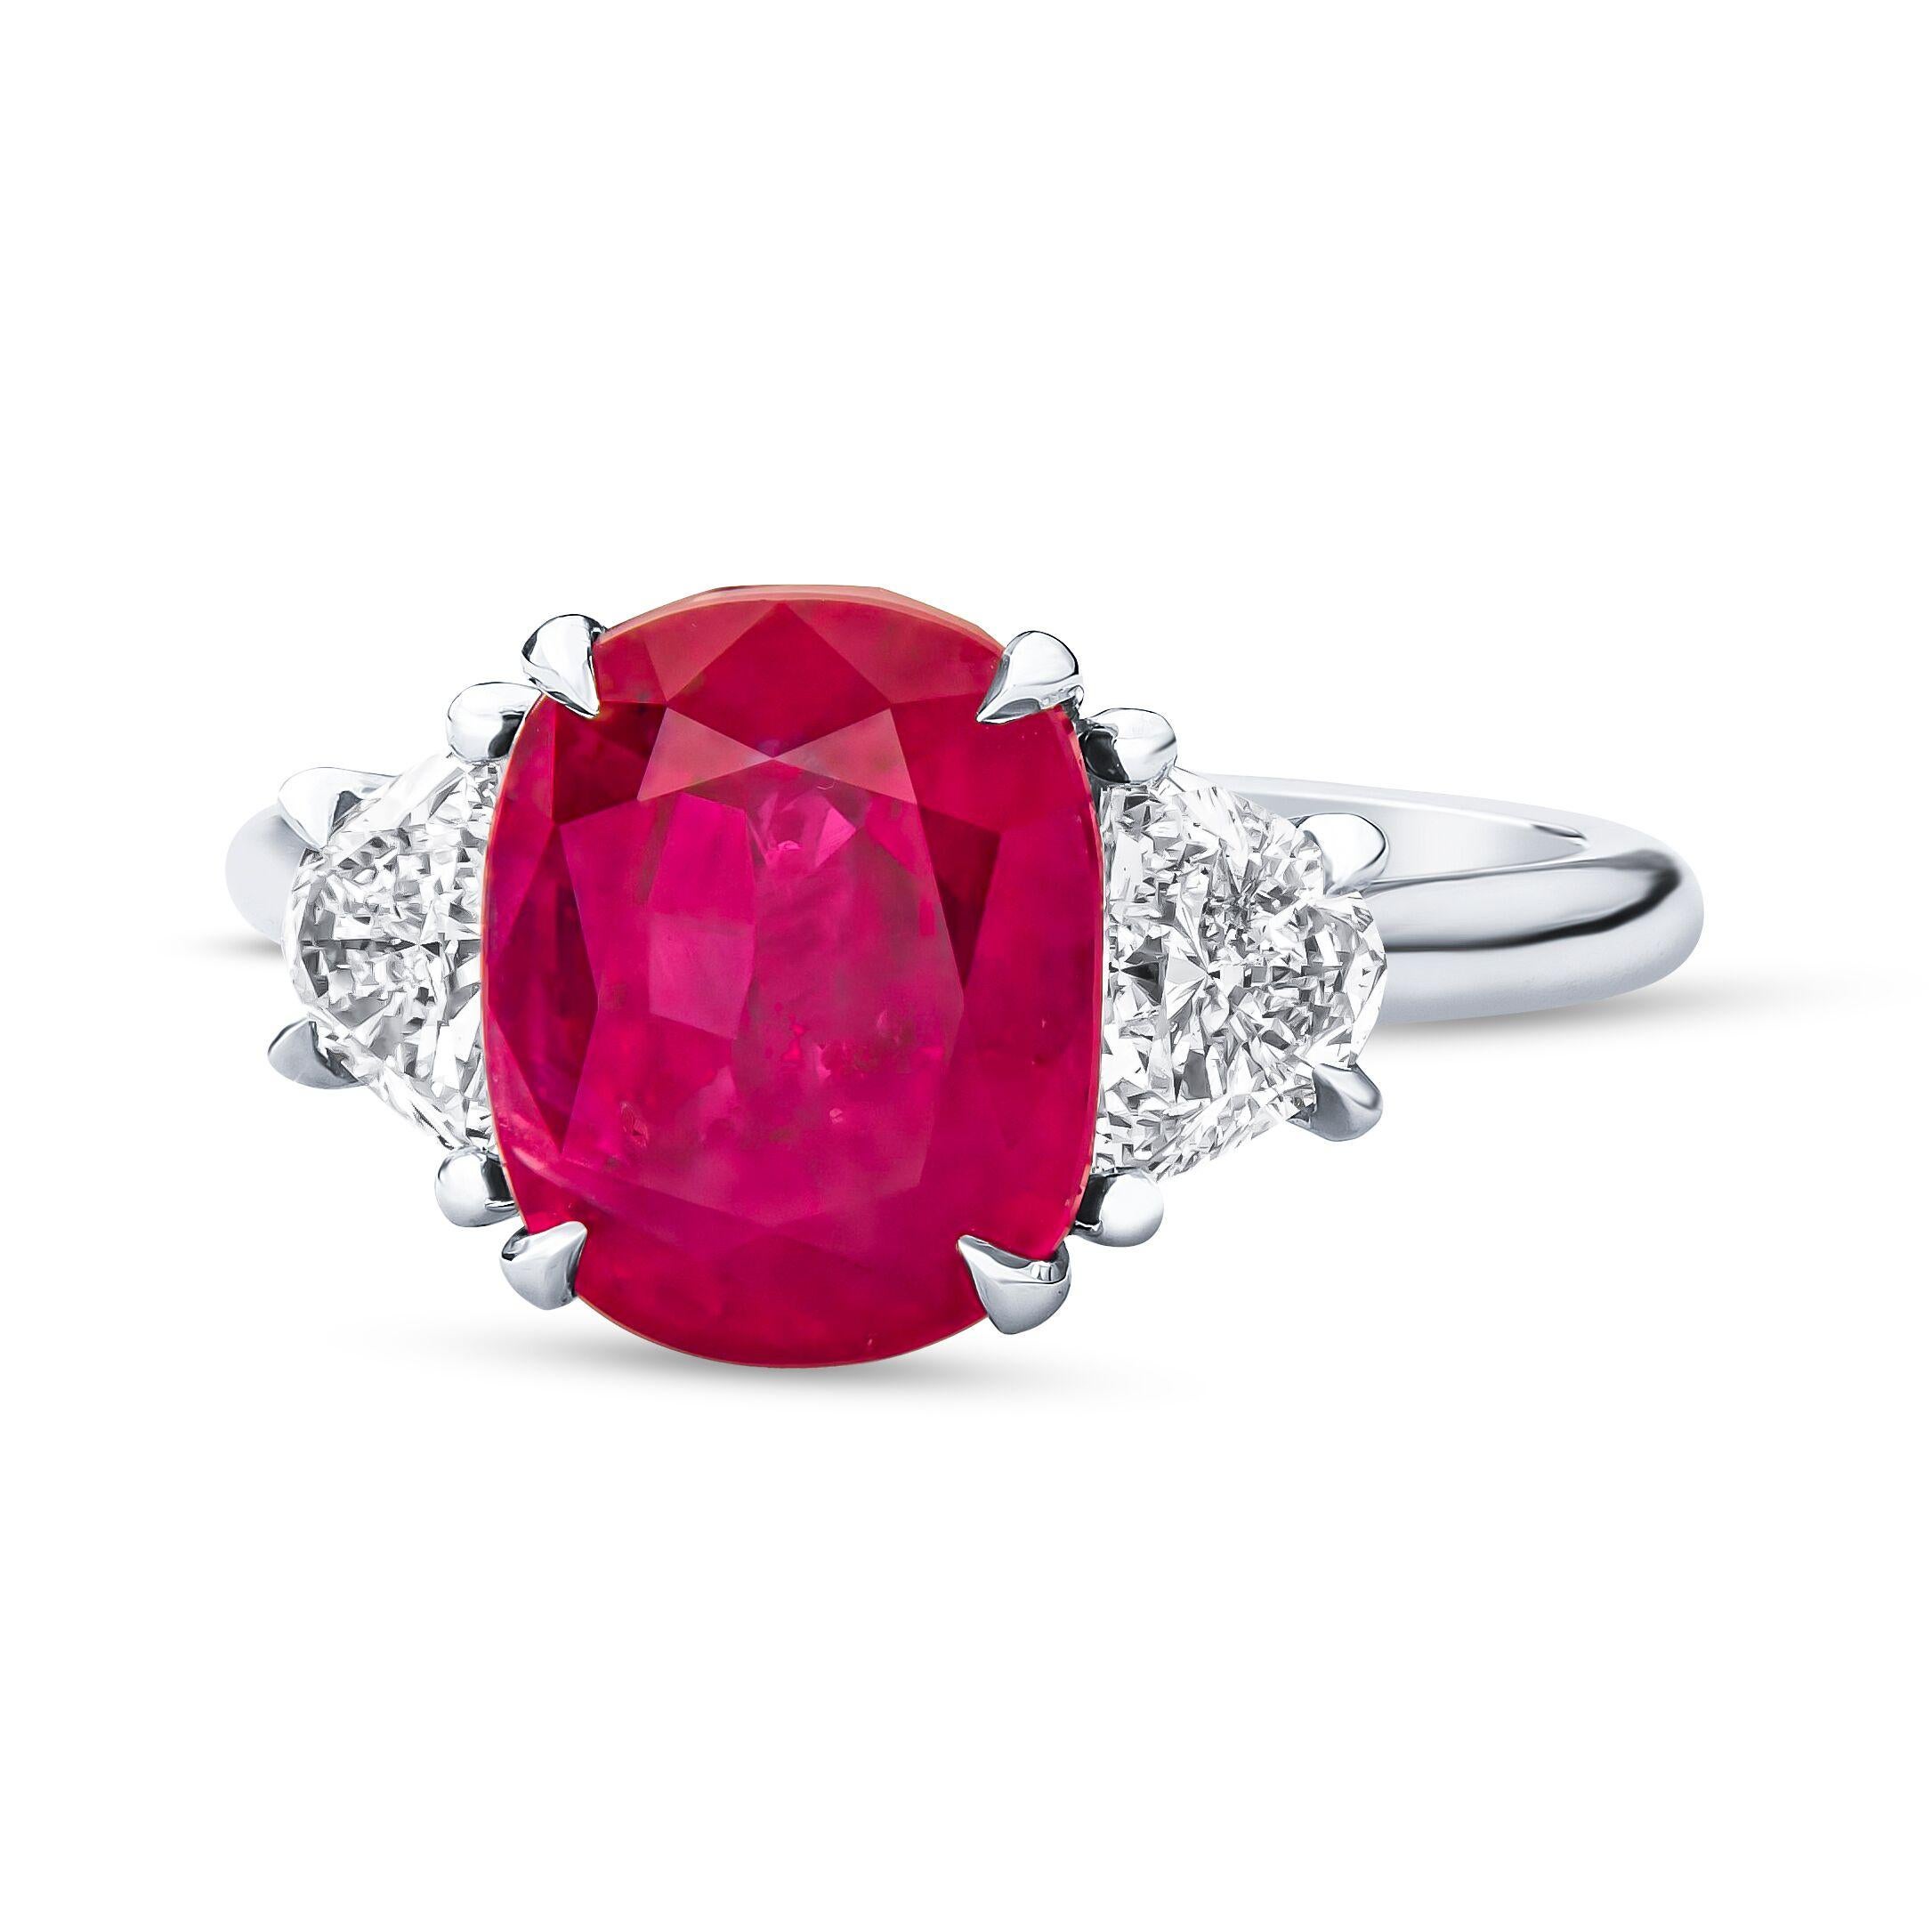 This is an absolutely gorgeous Estate Gubelin certified 5.53 CTW Burmese Ruby And Diamond Engagement Cocktail Ring. The center stone is a gorgeous vivid red color and absolutely eye clean that weighs 4.43 carats. It has been certified by the best